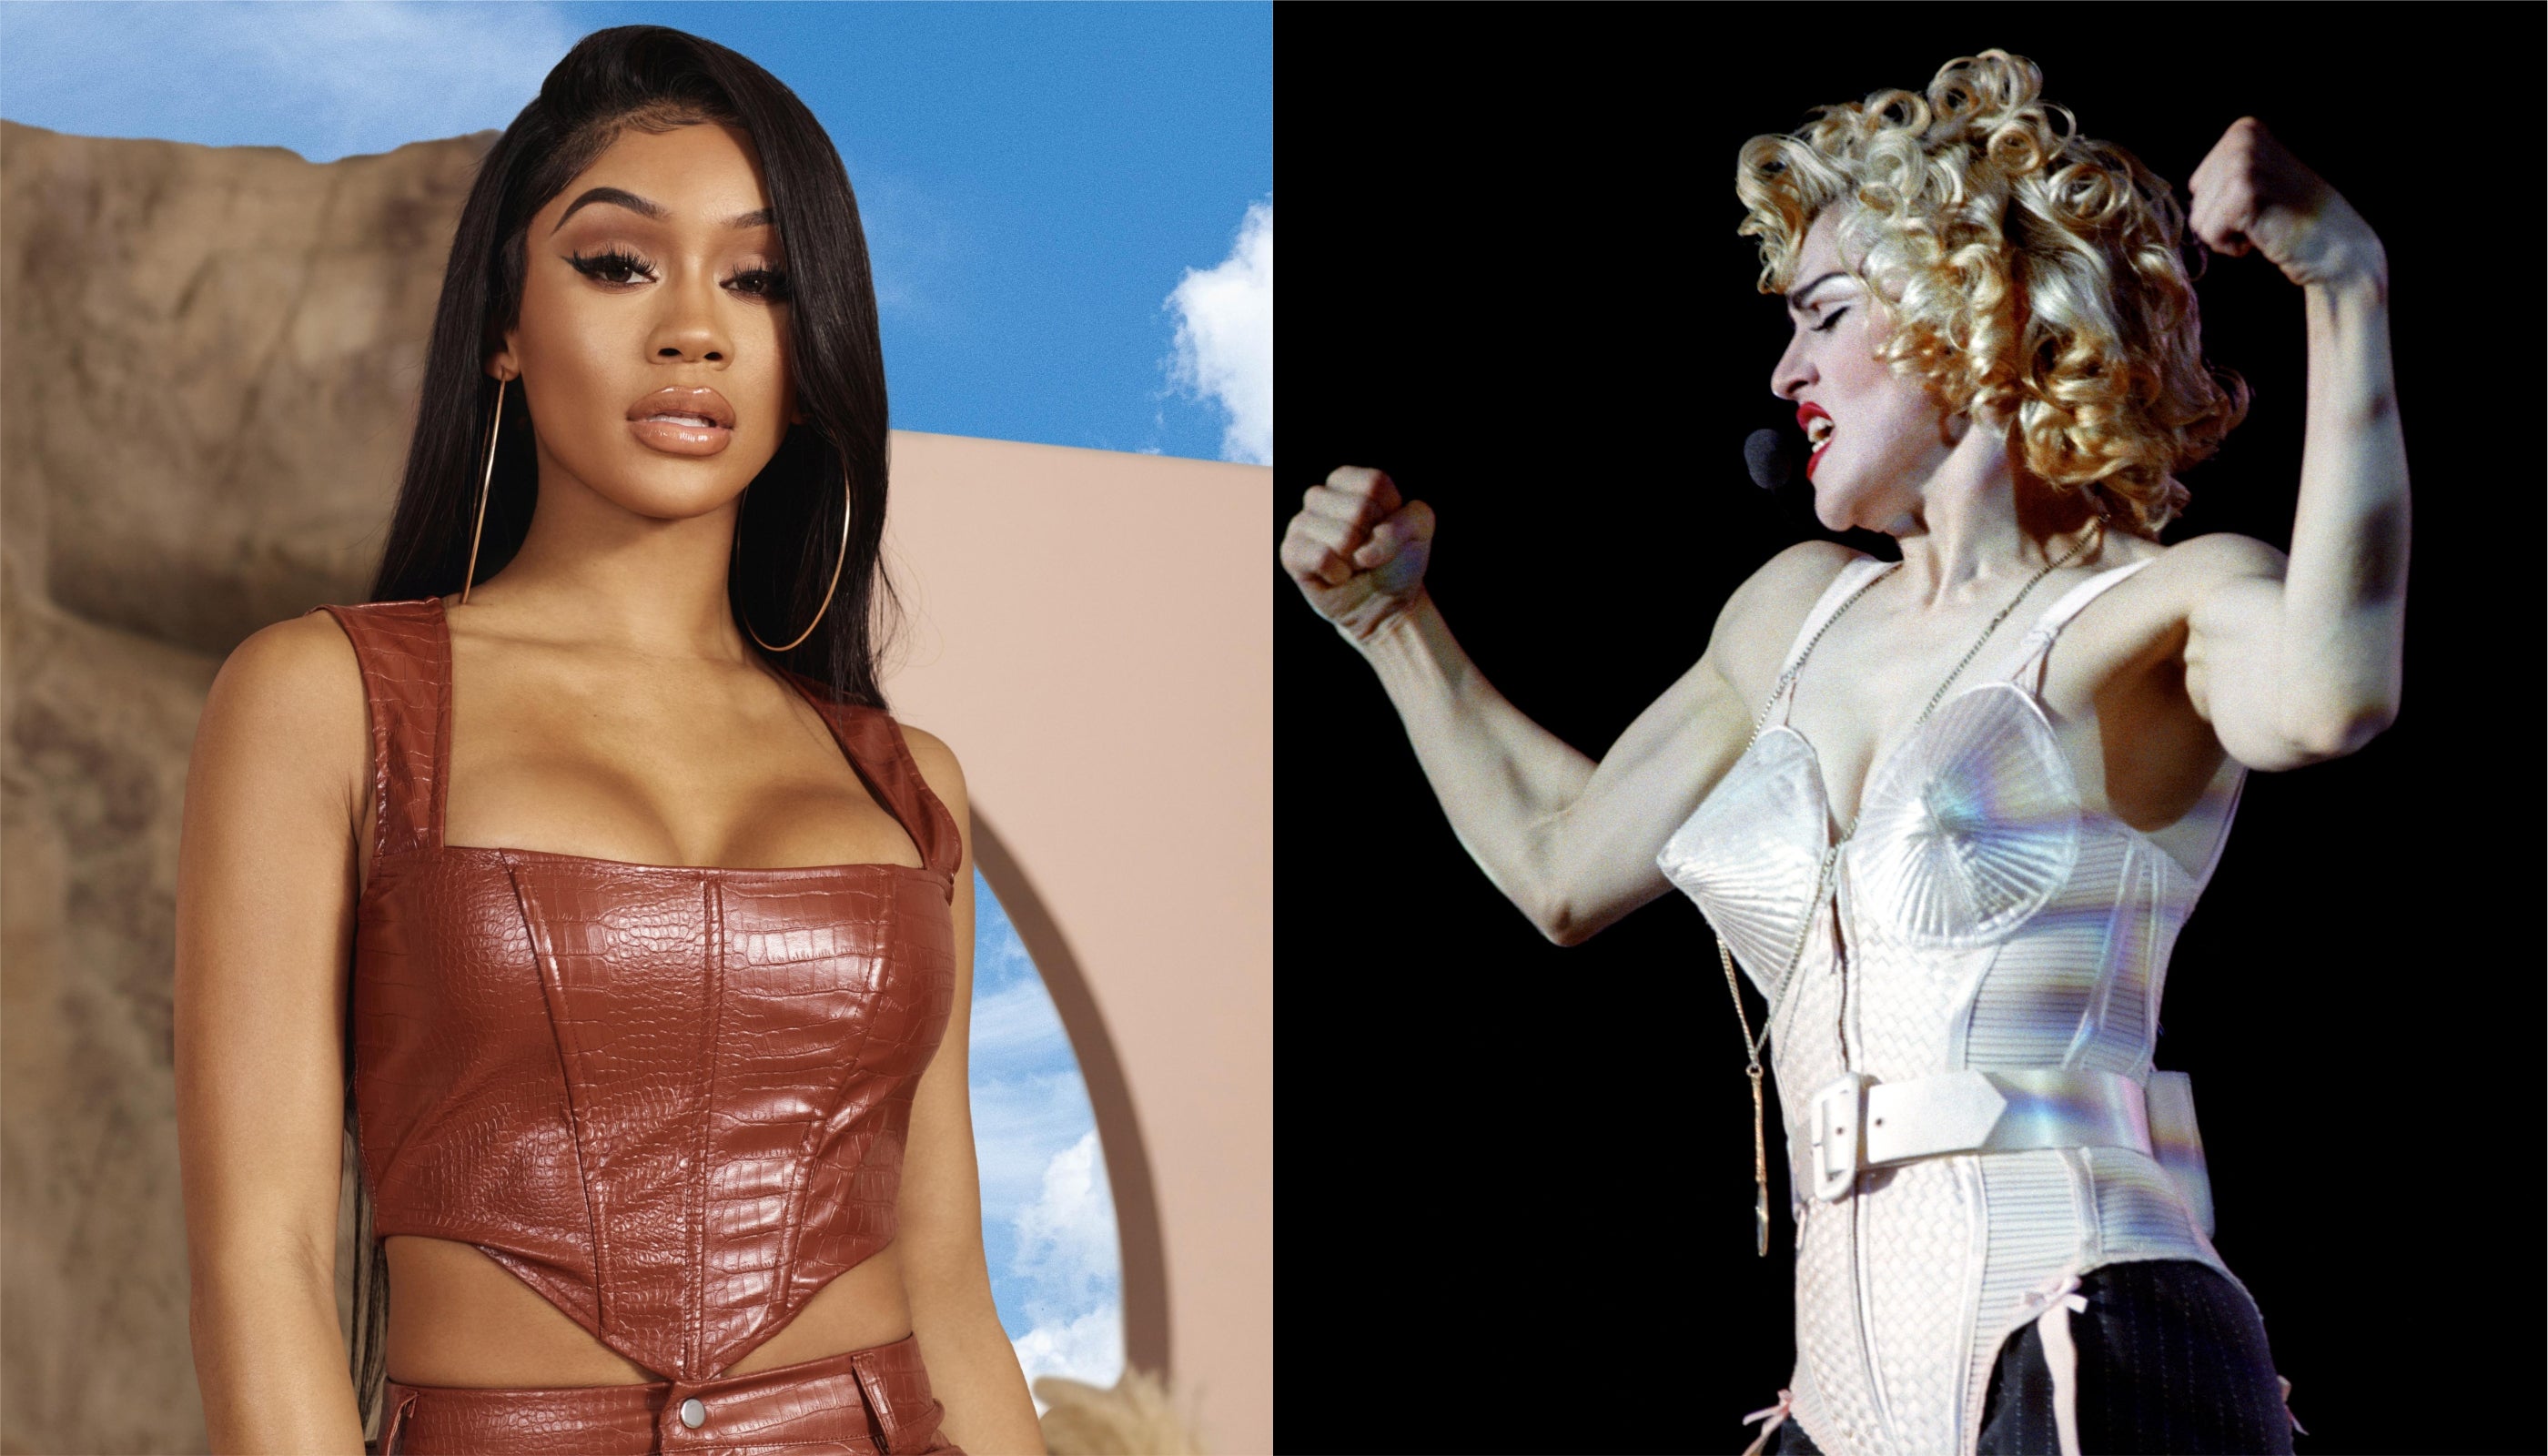 Saweetie and Madonna wearing corsets